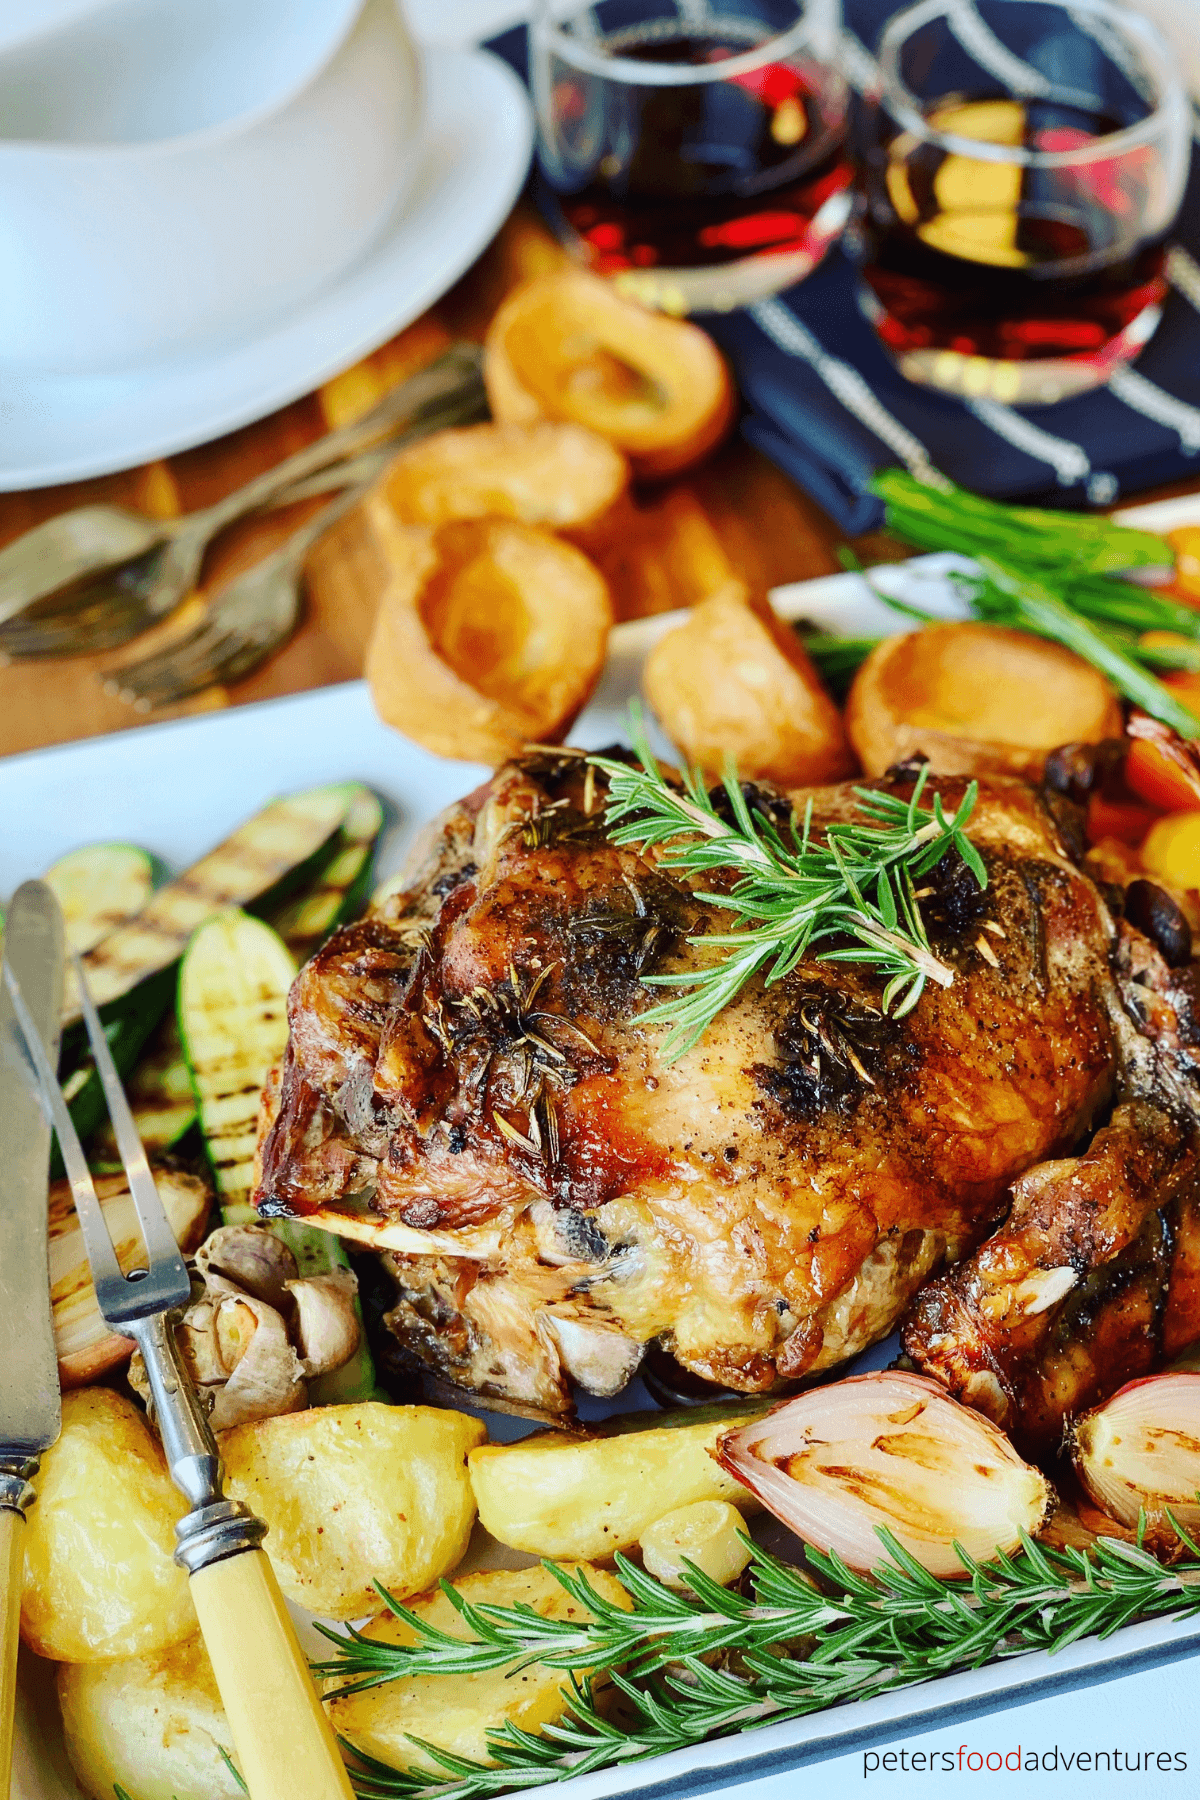 Slow Roast Leg of Lamb recipe, perfect for a Sunday Roast, an Easter Lamb lunch, or for dinner tonight. Roast Lamb with pierced with fresh rosemary and garlic, roasted with vegetables.